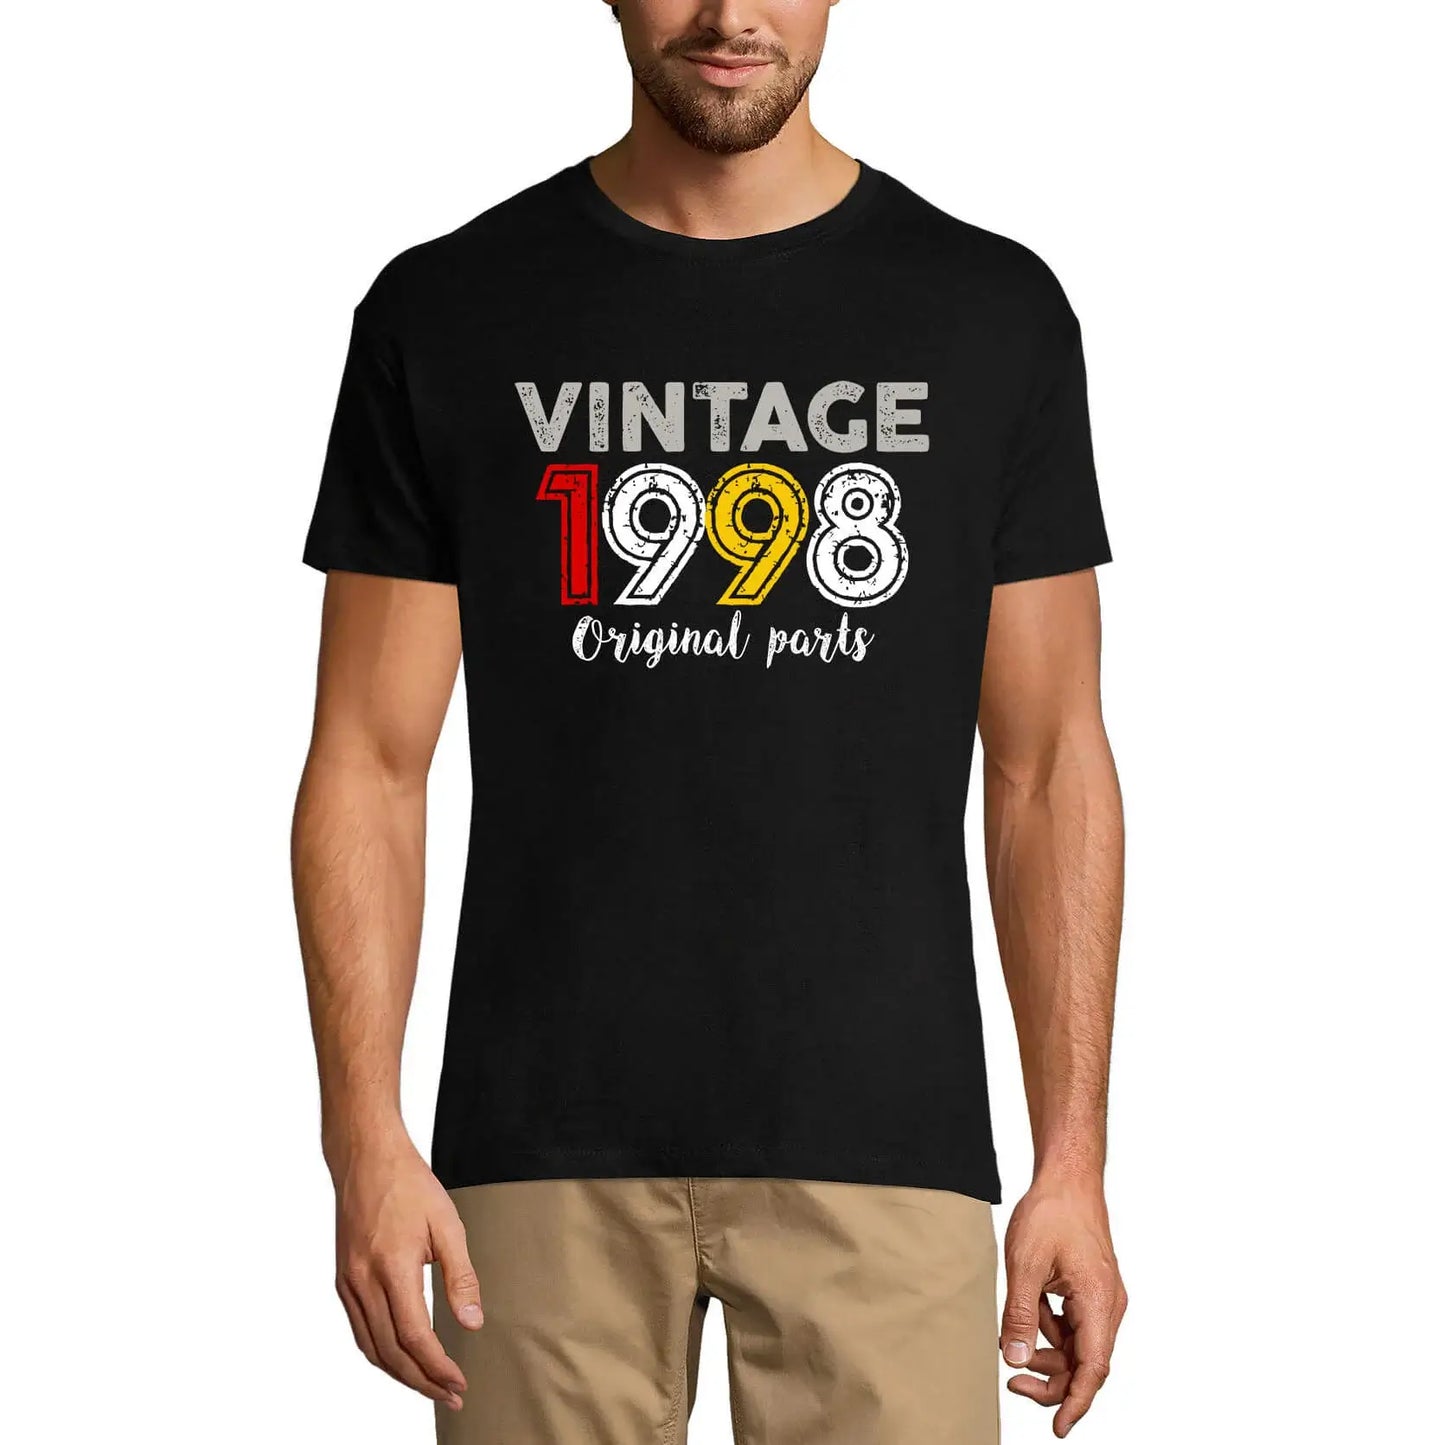 Men's Graphic T-Shirt Original Parts 1998 26th Birthday Anniversary 26 Year Old Gift 1998 Vintage Eco-Friendly Short Sleeve Novelty Tee